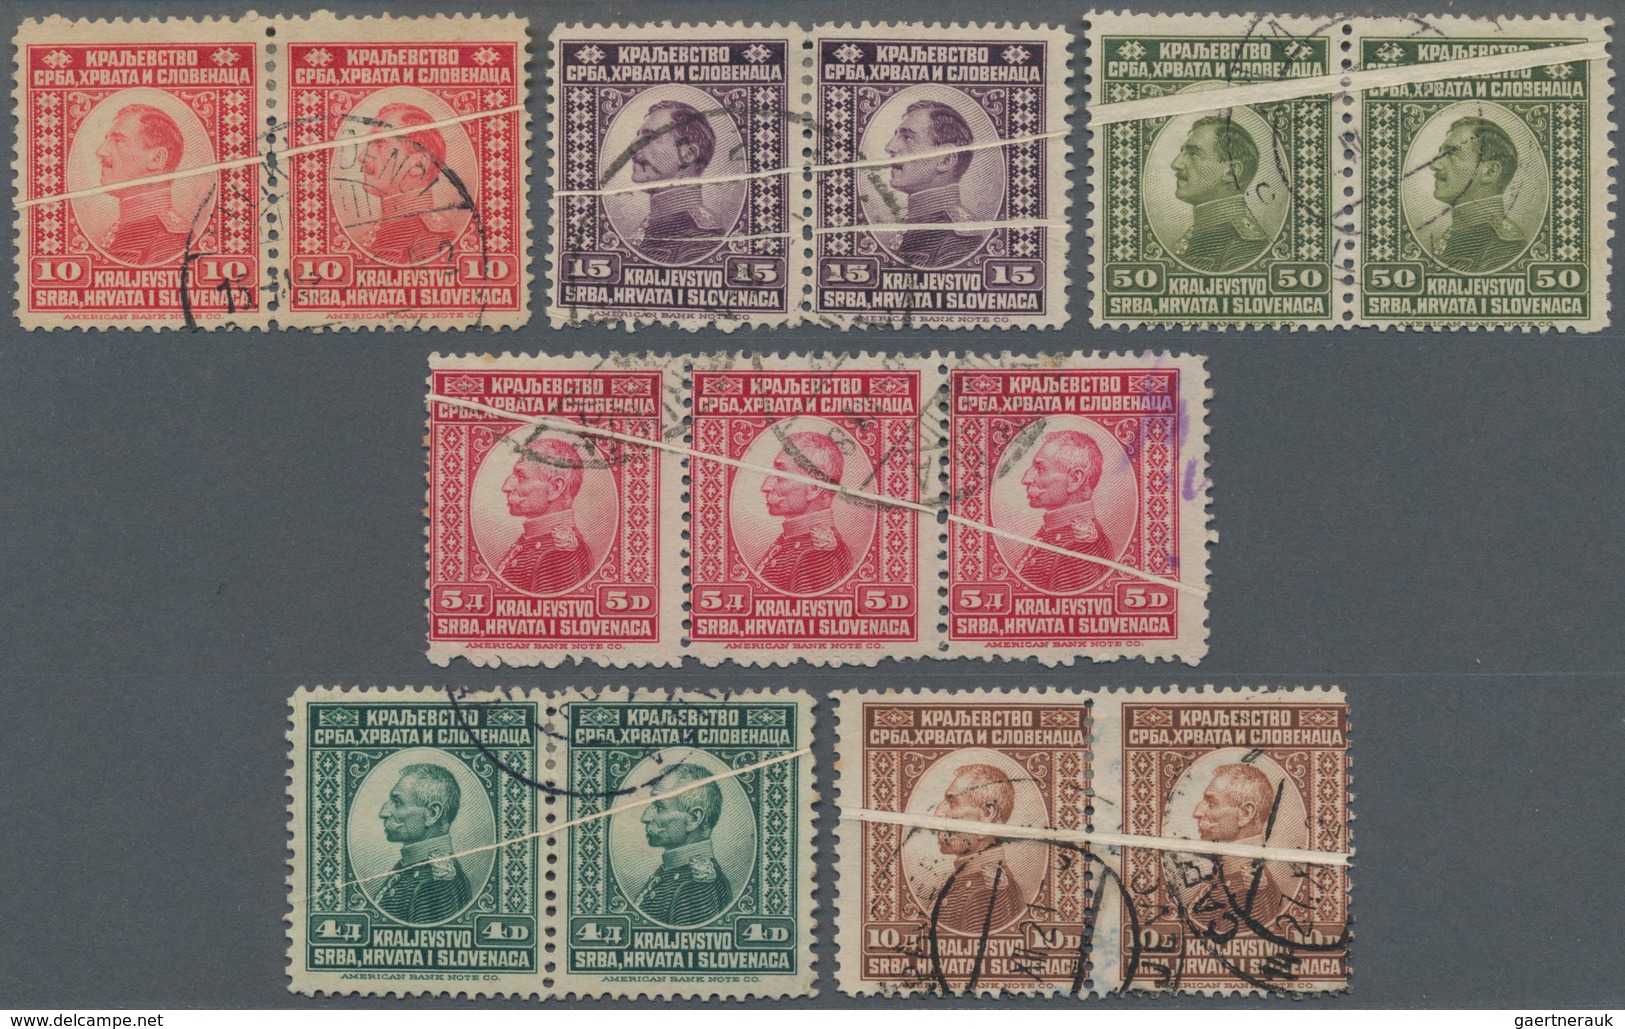 Jugoslawien: from 1918 great lot of only better selected single pieces, incl. special features, vari